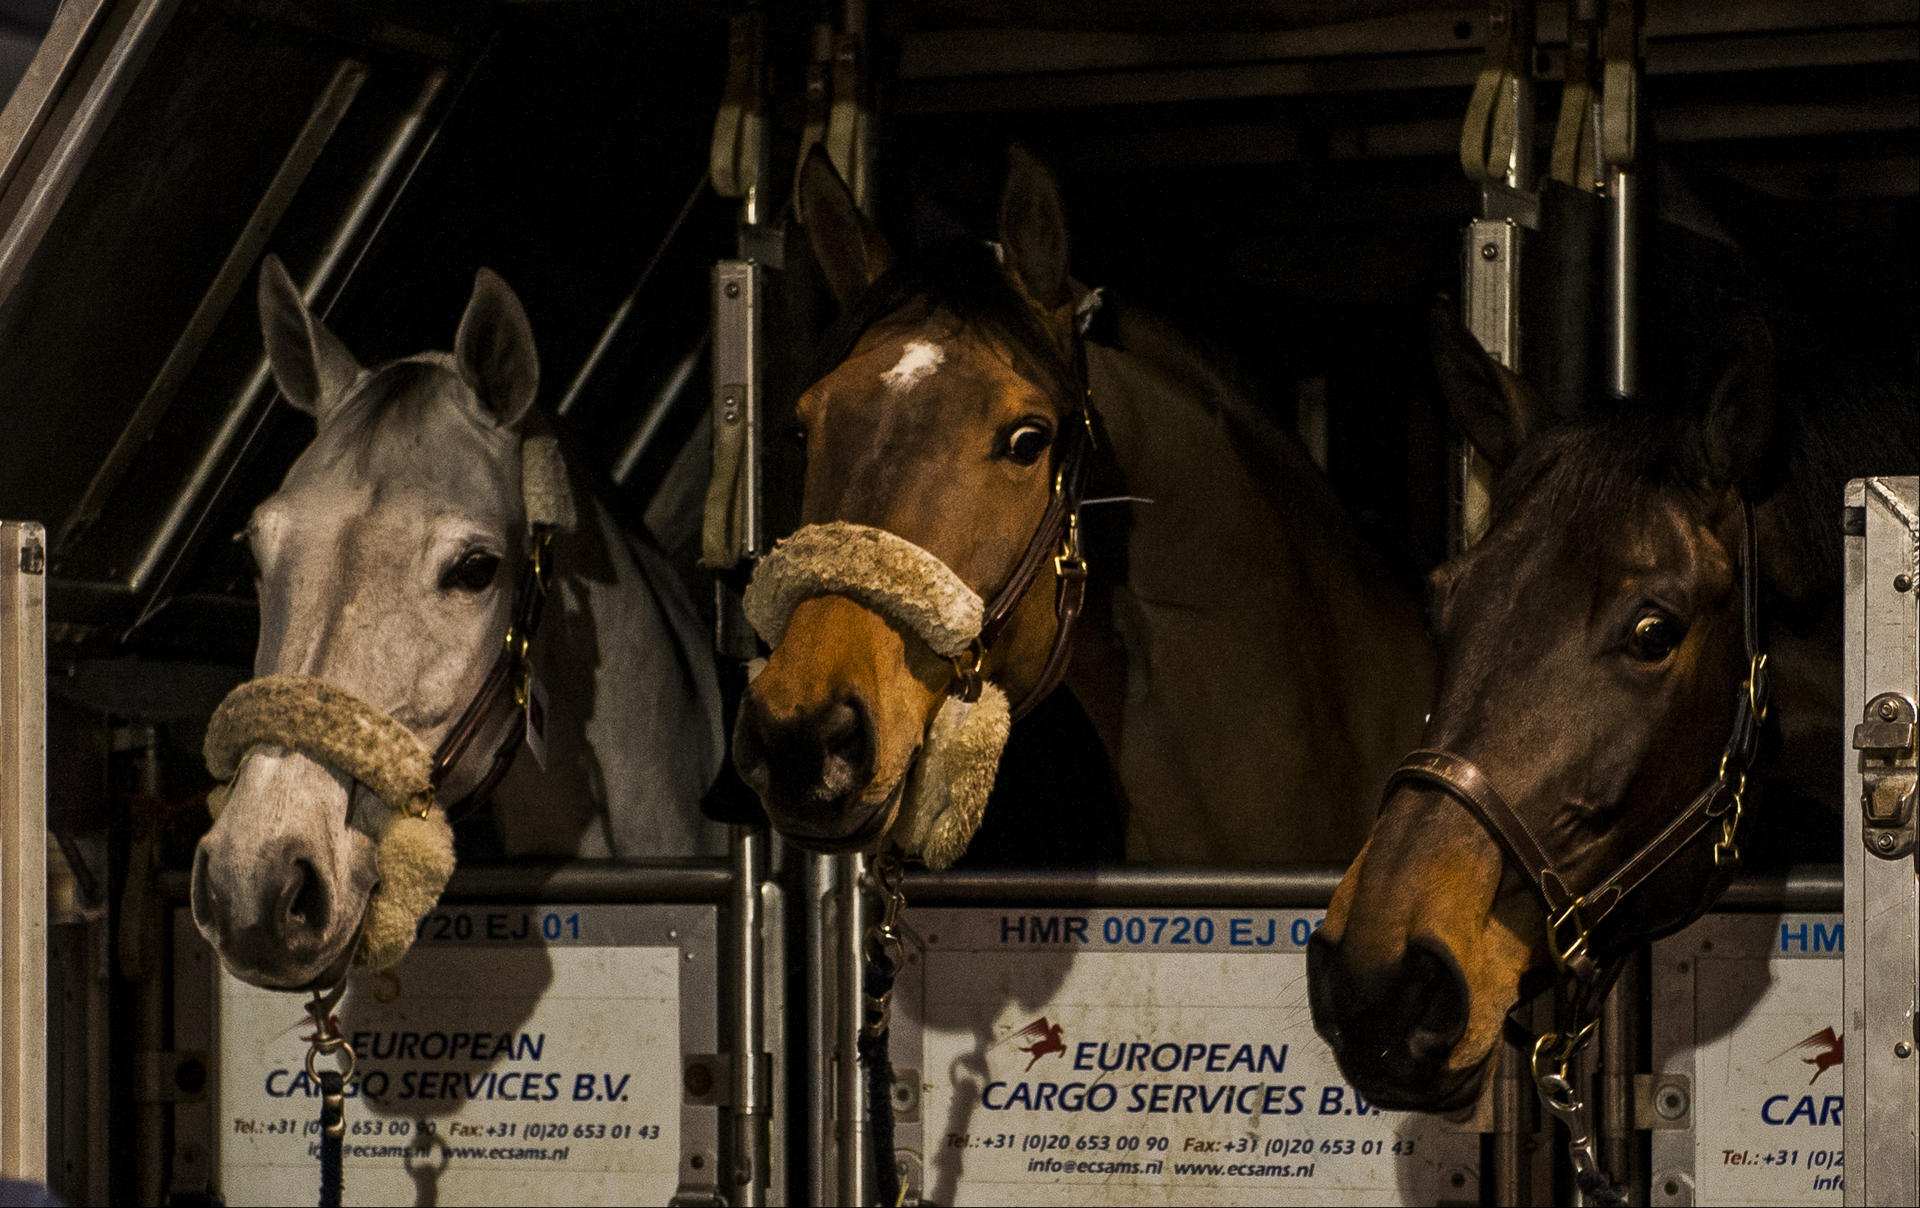 A little startled these horses may seem, but not surprising after their 13-hour flight from Belgium for the Longines Hong Kong Masters showjumping this weekend. Photo: SCMP Pictures